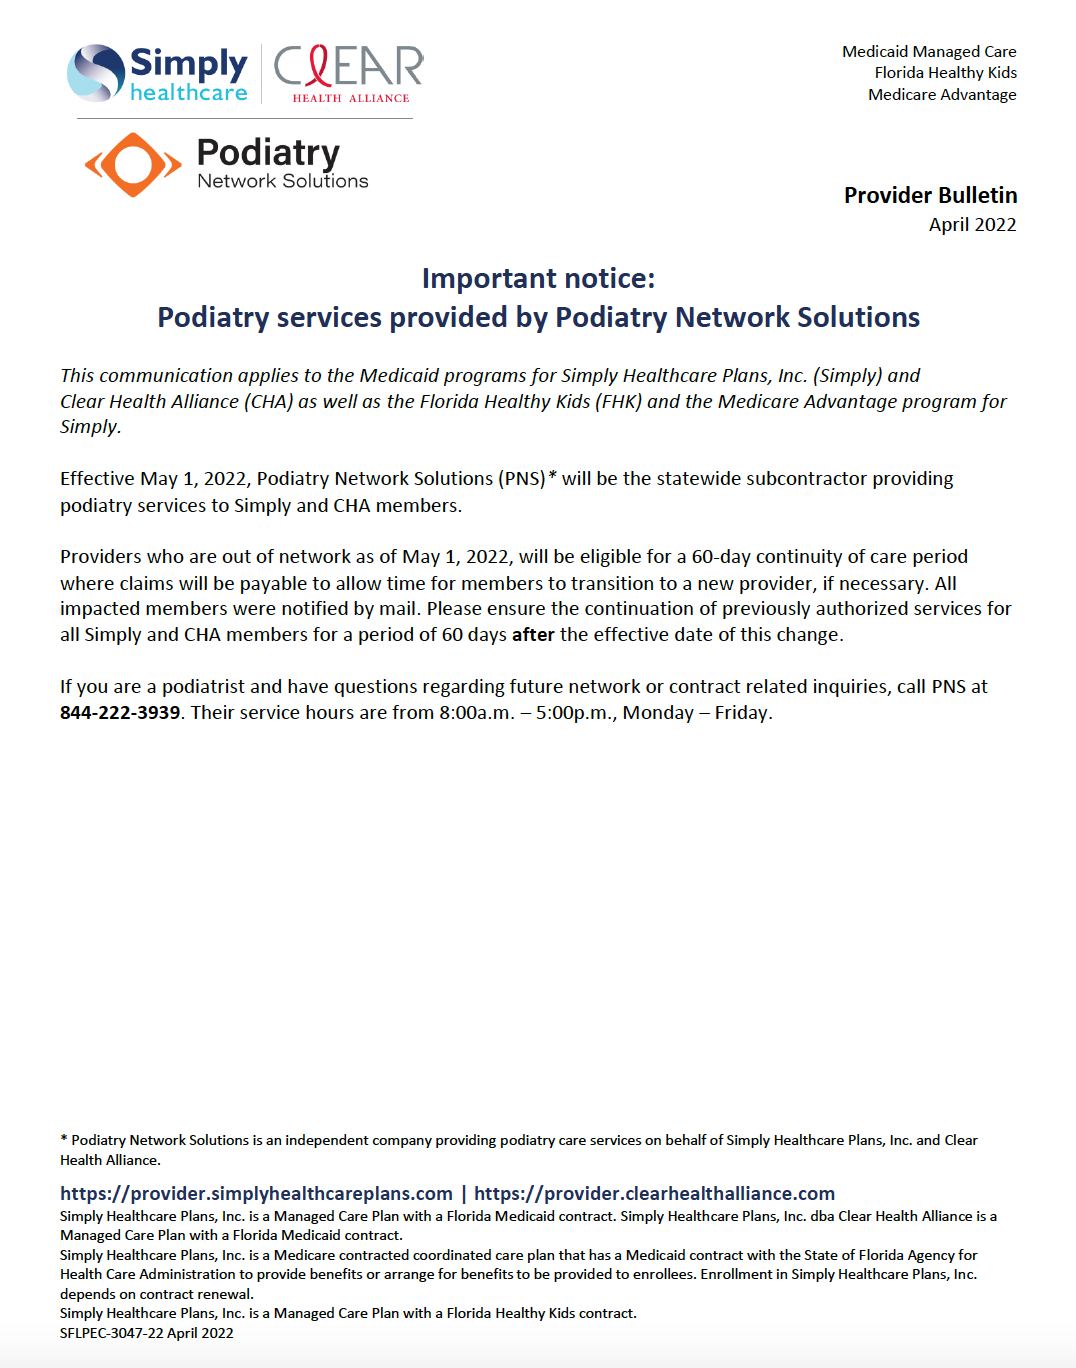 Podiatry Network Solutions partnership with Simply Health Plans